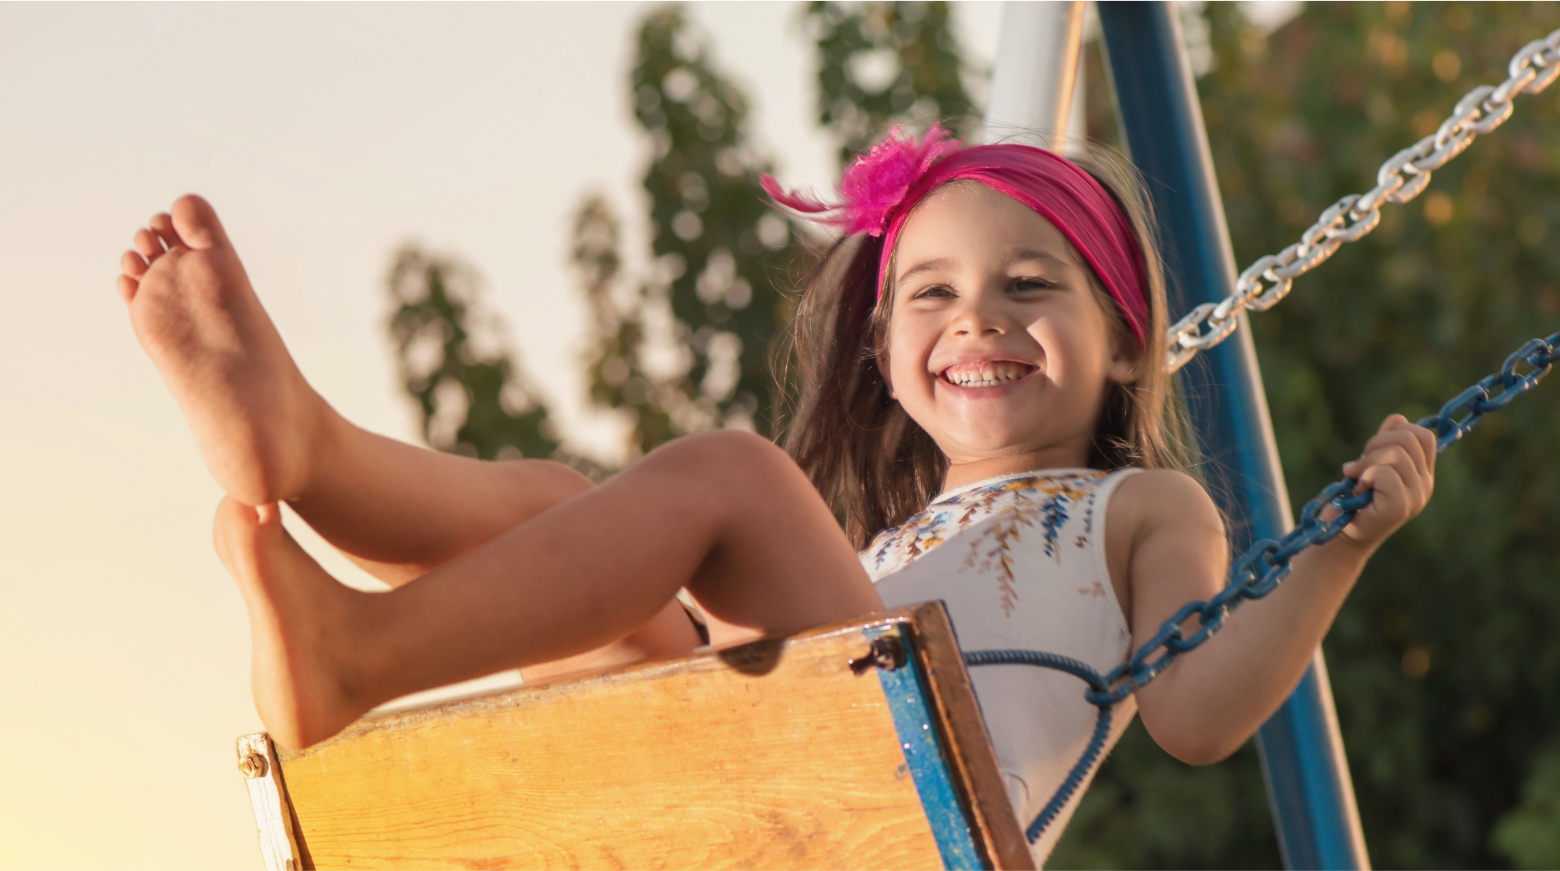 A picture of a young girl swinging on a swing with a huge smile on her face